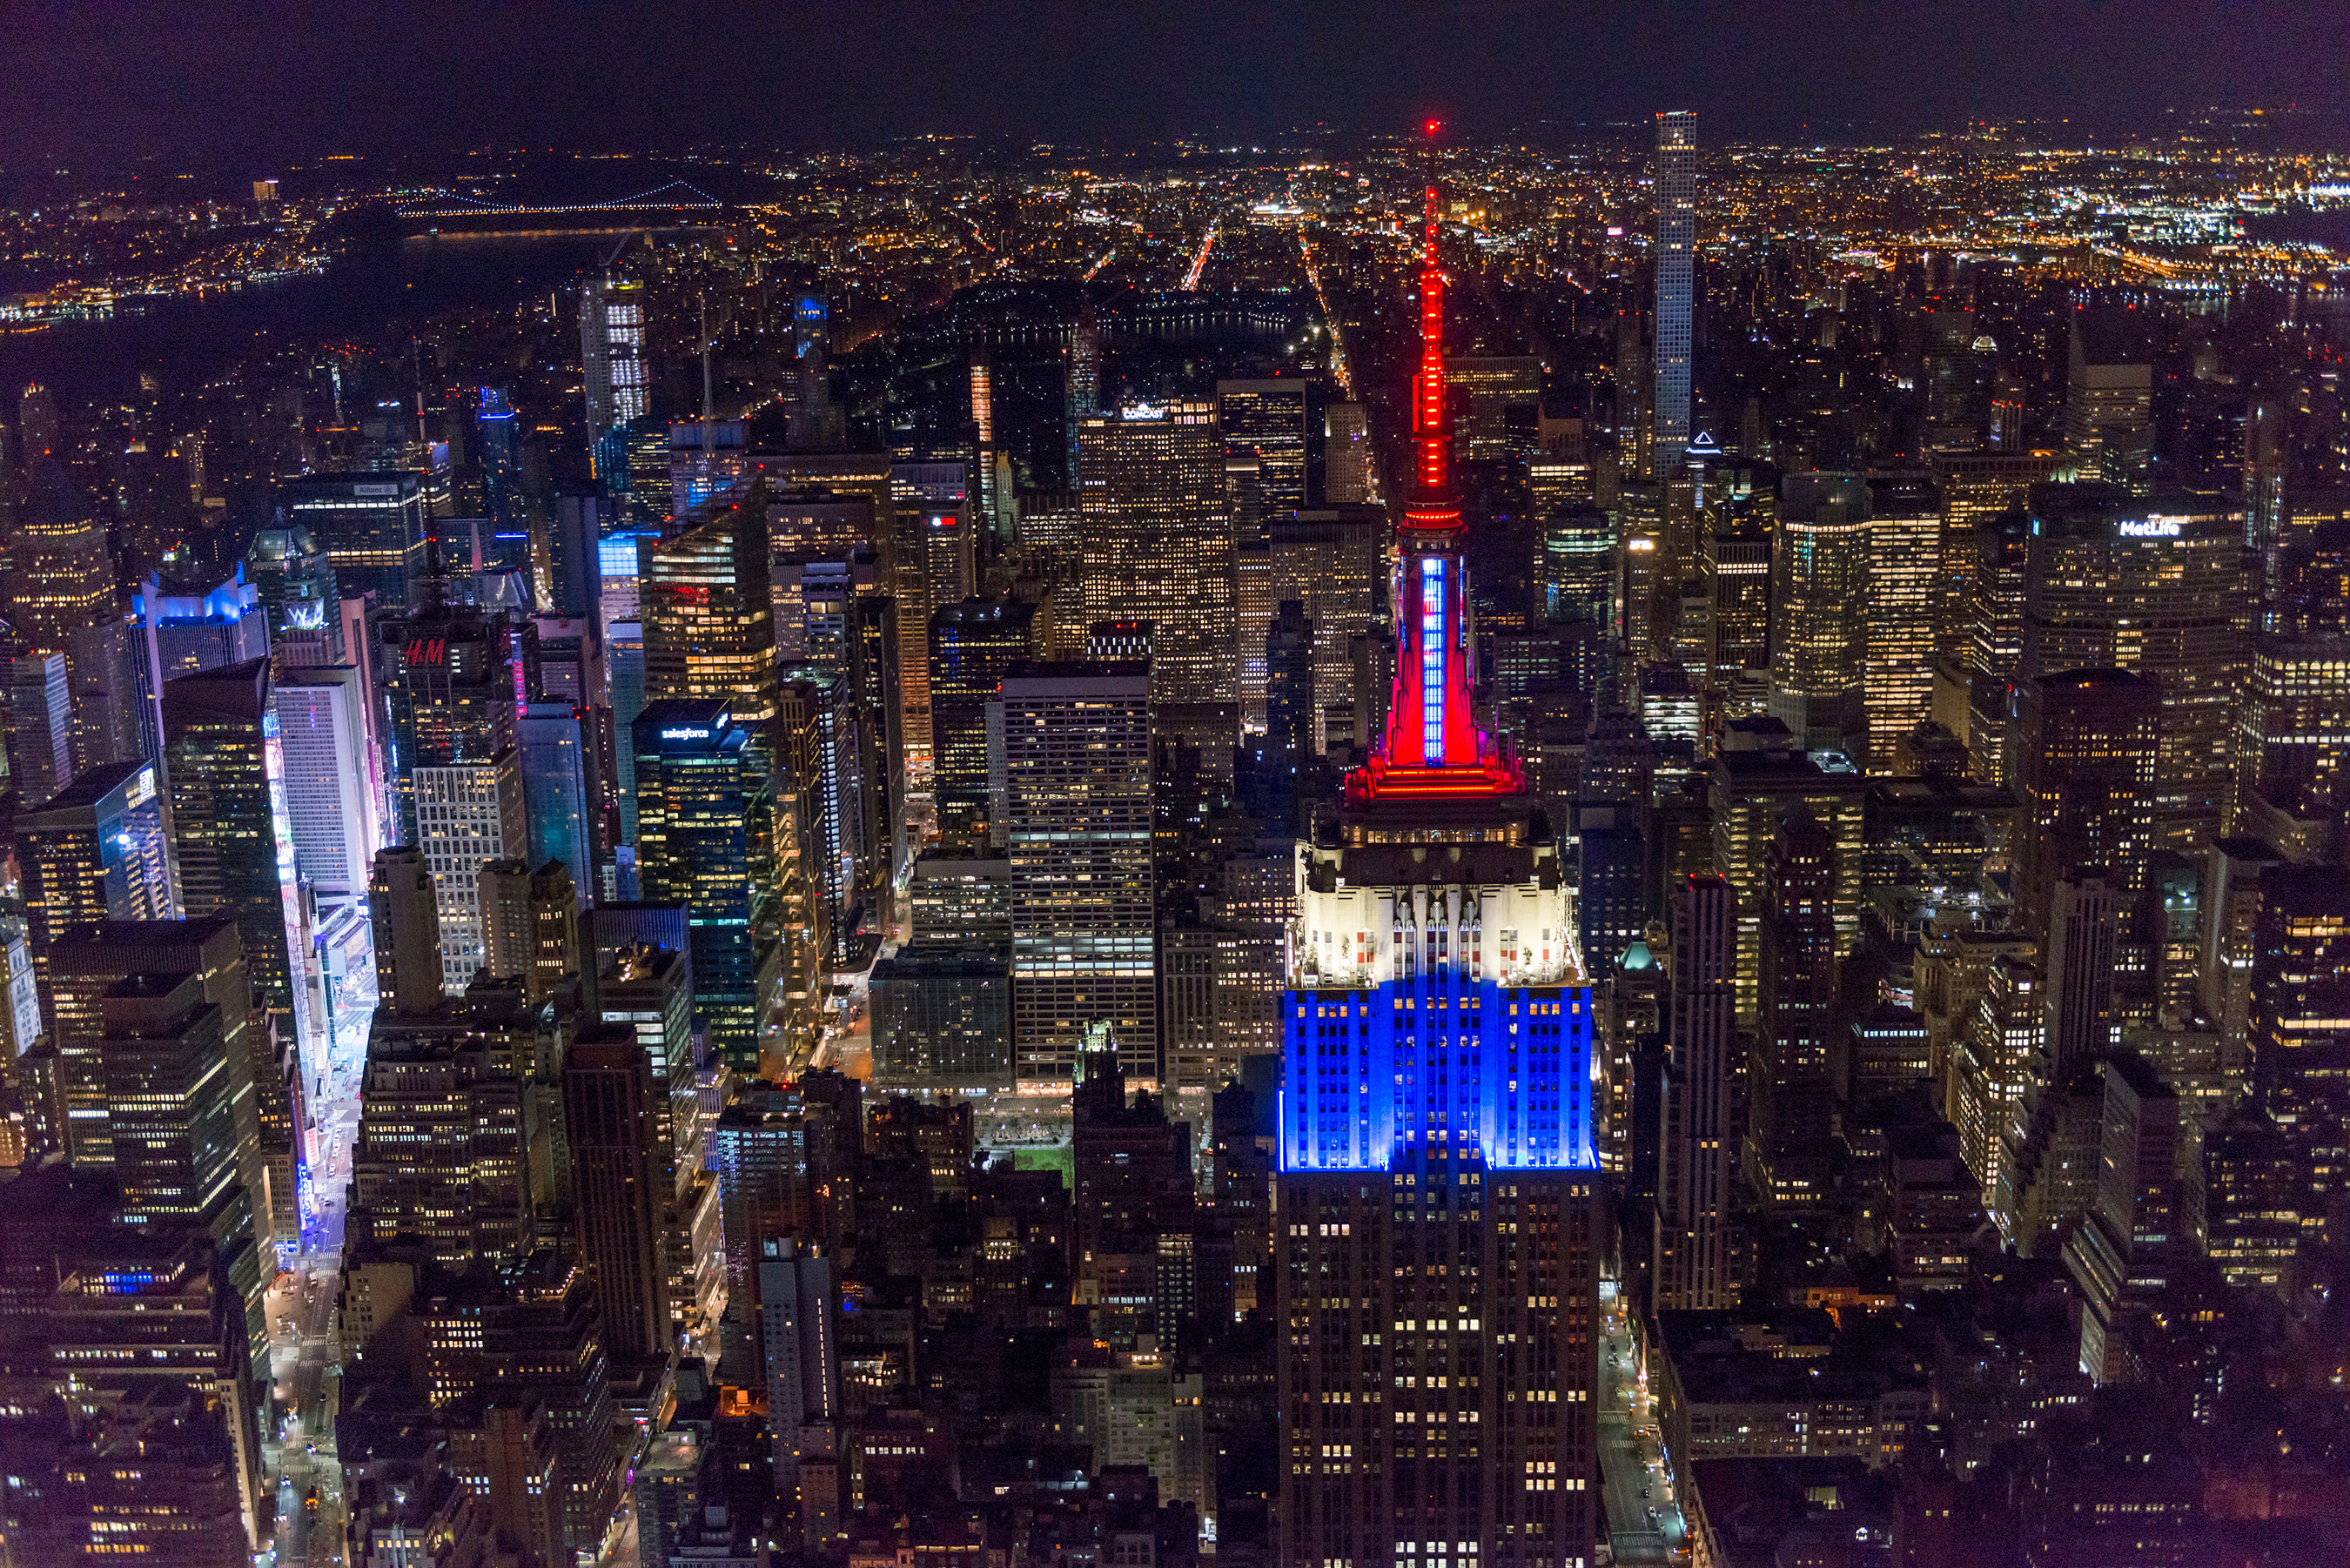 The Empire State Building shines for Australia in honor of the 2018 World Cup